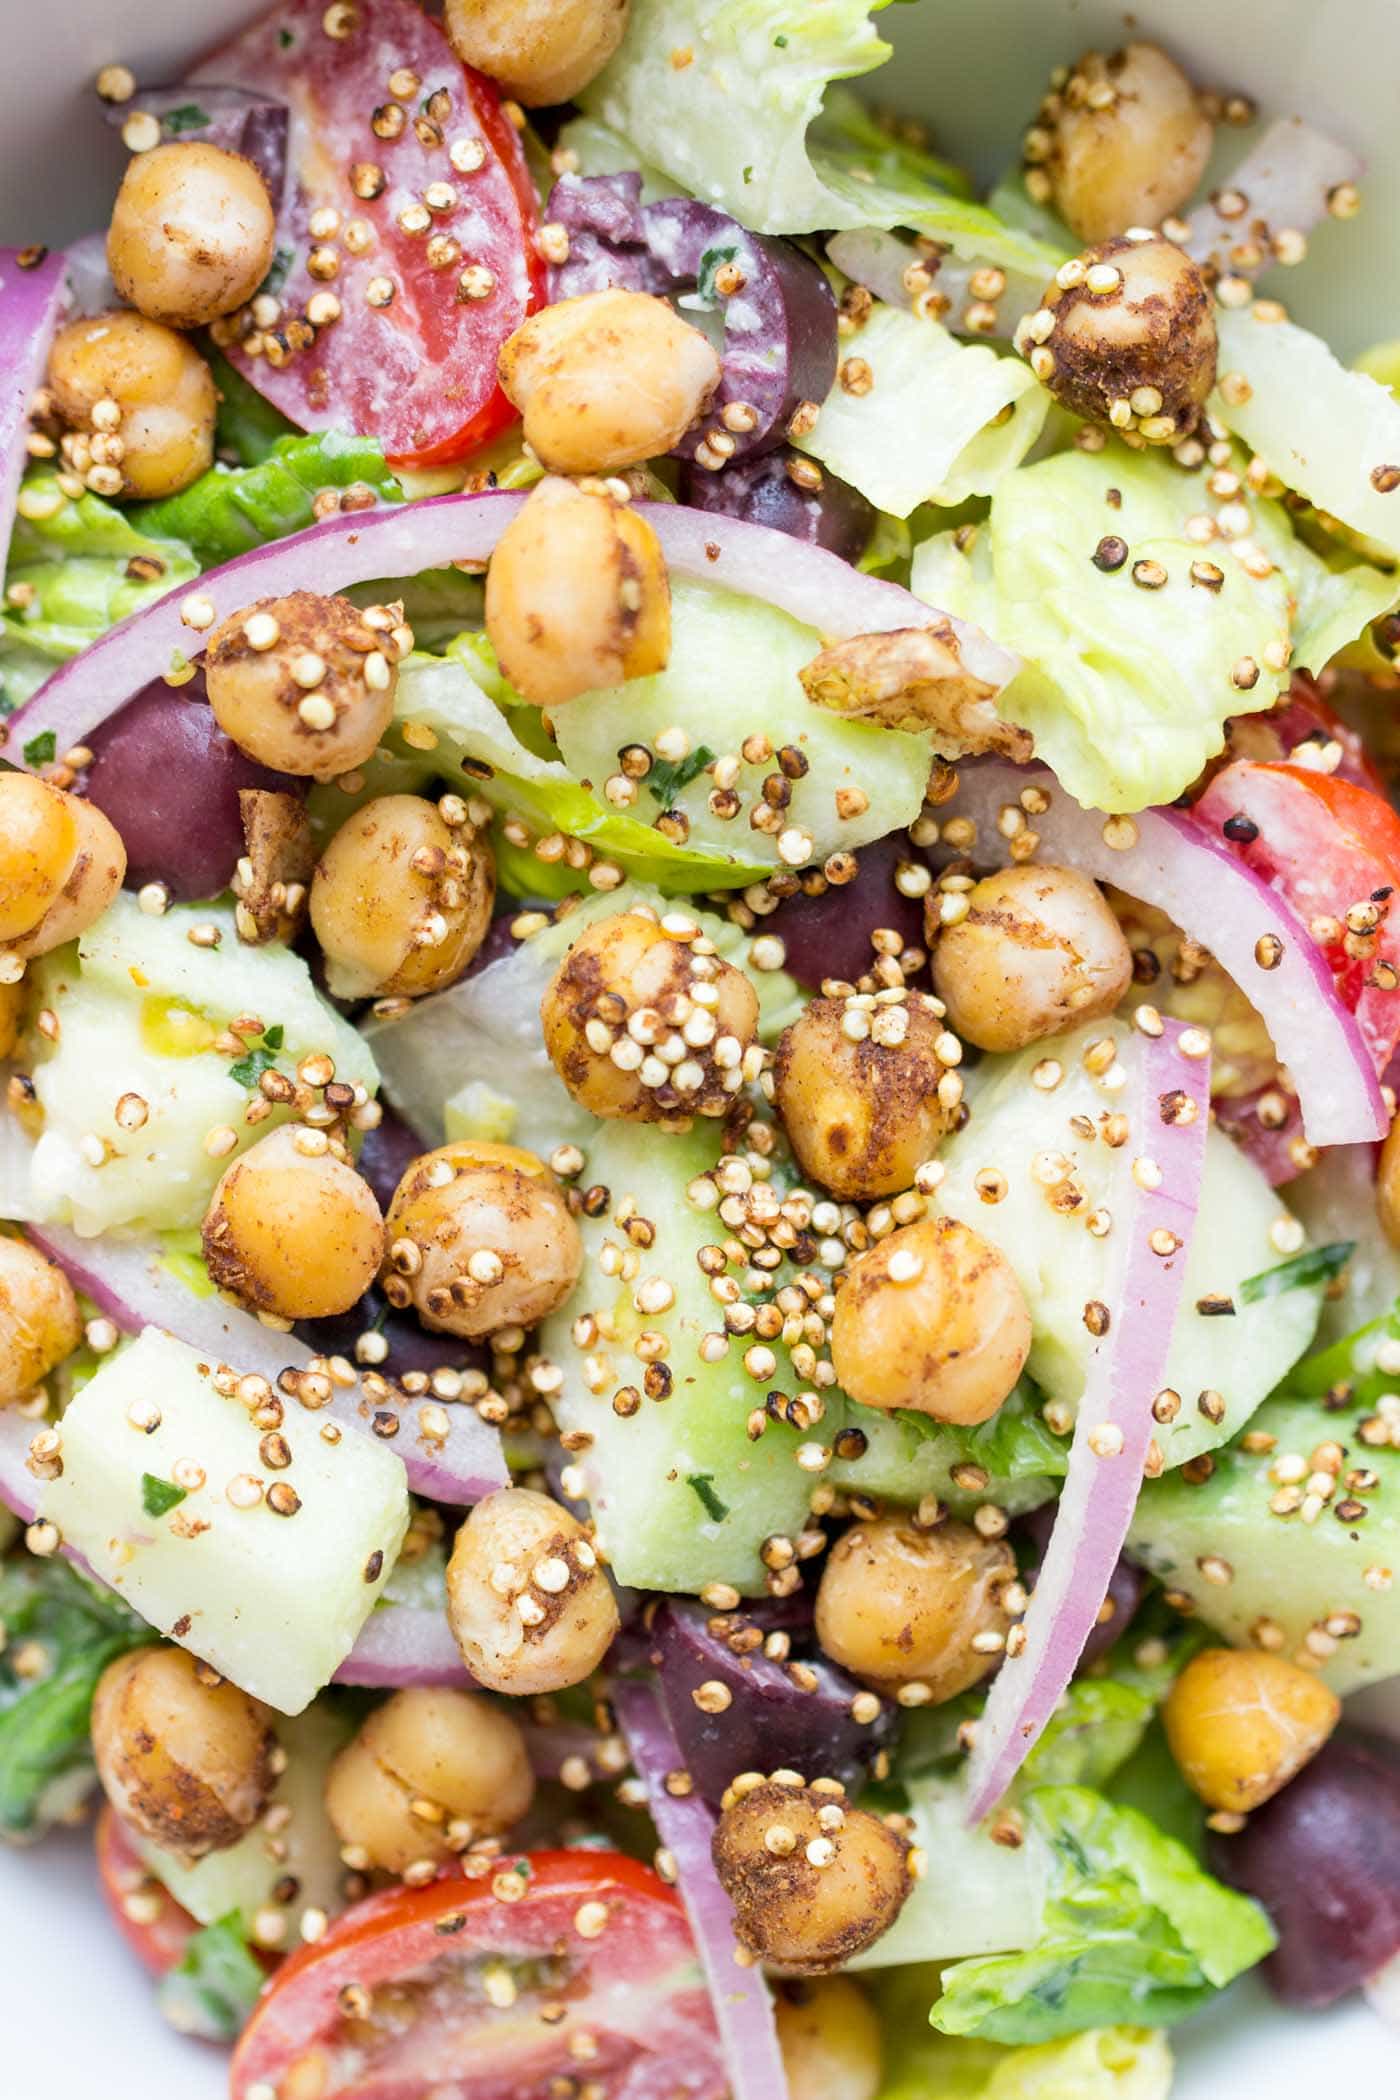 This vegan chopped salad is SO GOOD -- topped with a tarragon tahini dressing and warm spiced chickpeas!